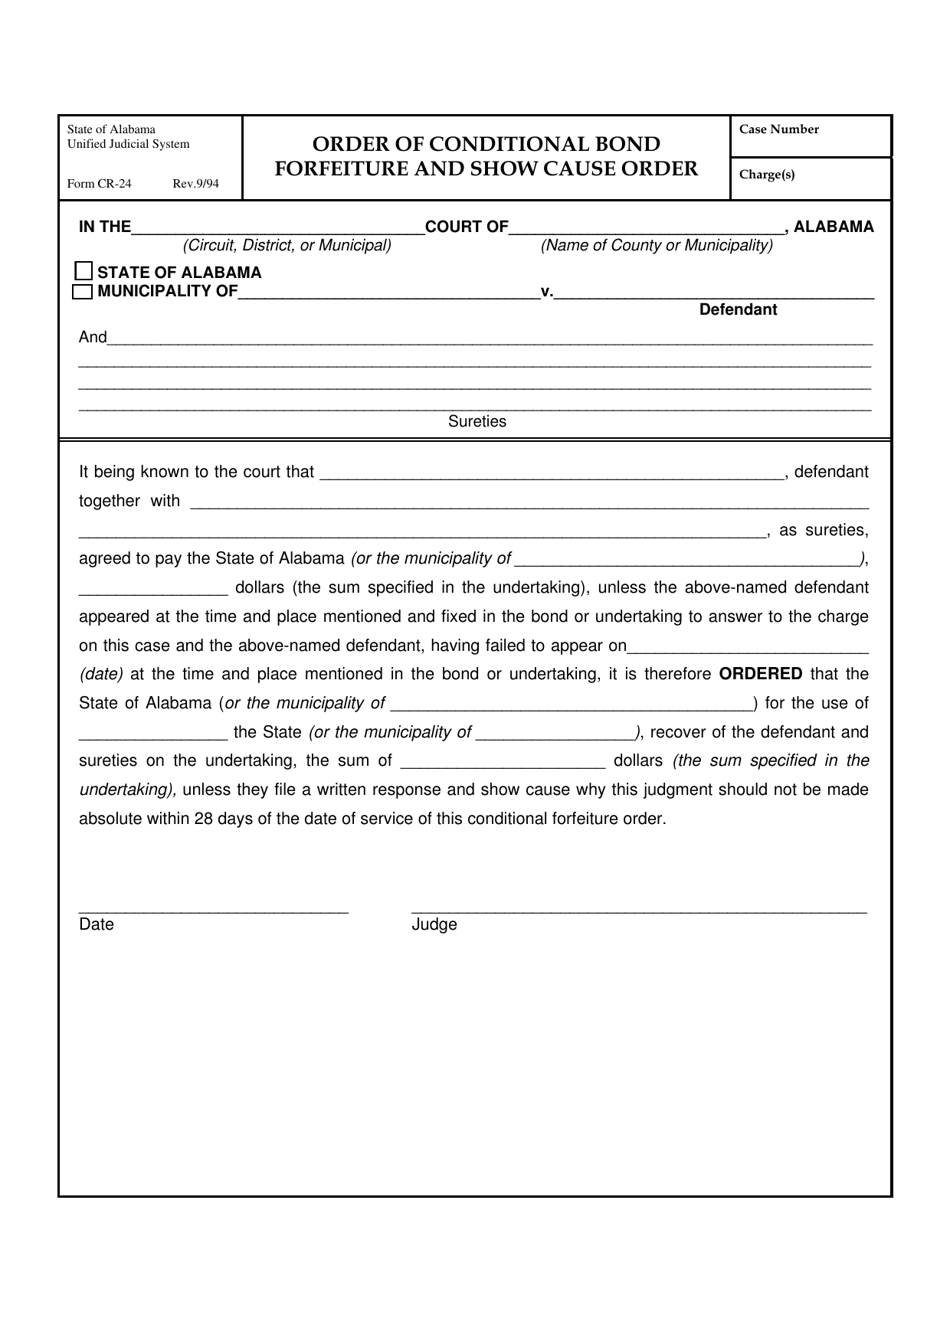 Form CR-24 Order of Conditional Bond Forfeiture and Show Cause Order - Alabama, Page 1